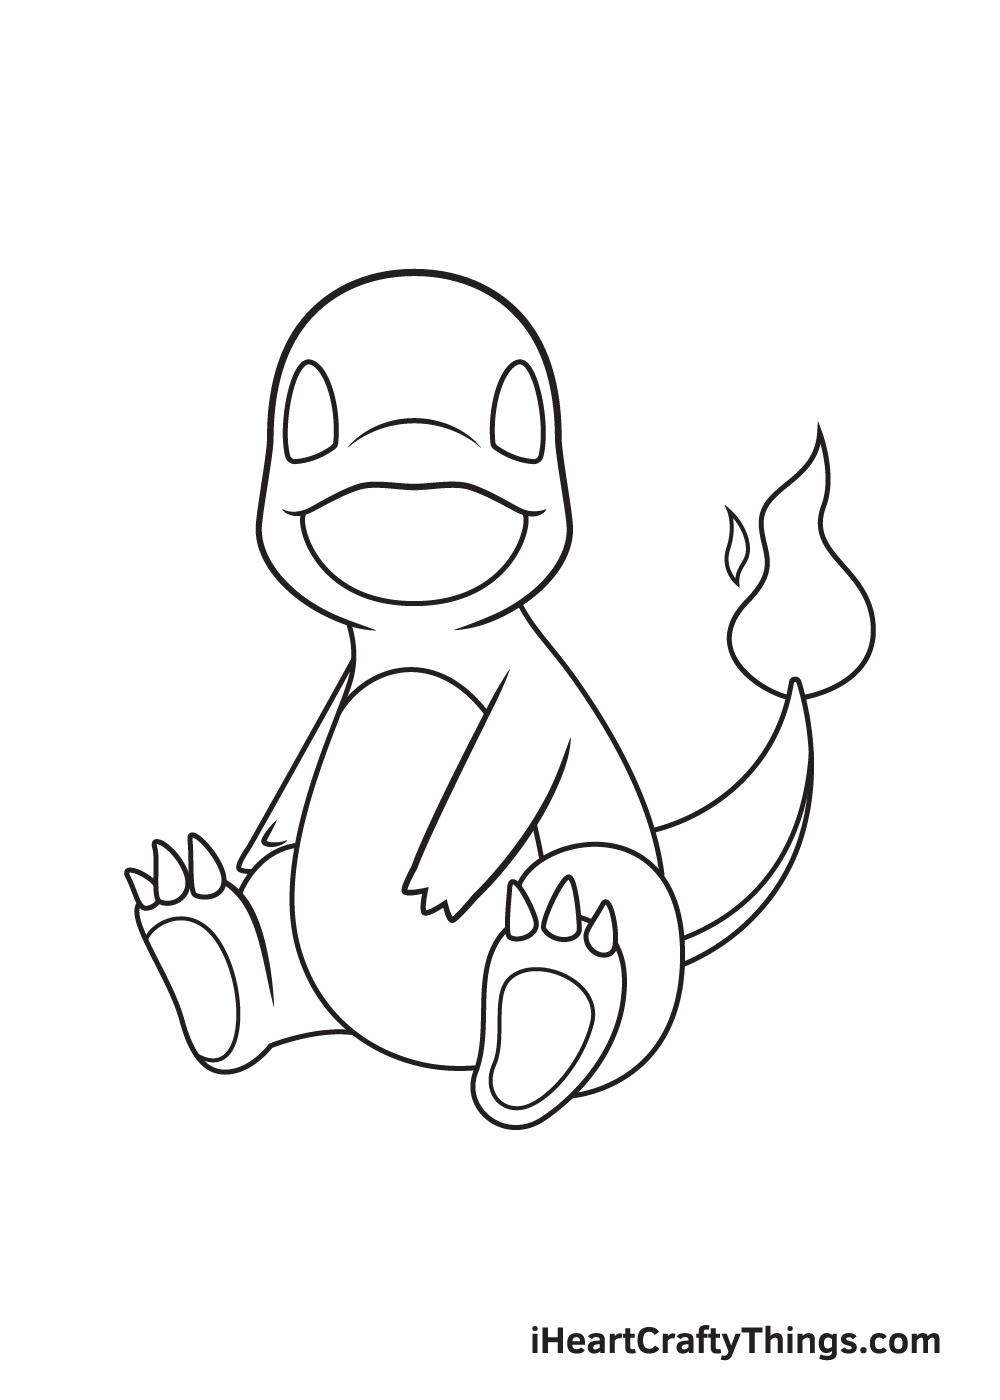 Charmander Drawing - How To Draw Charmander Step By Step